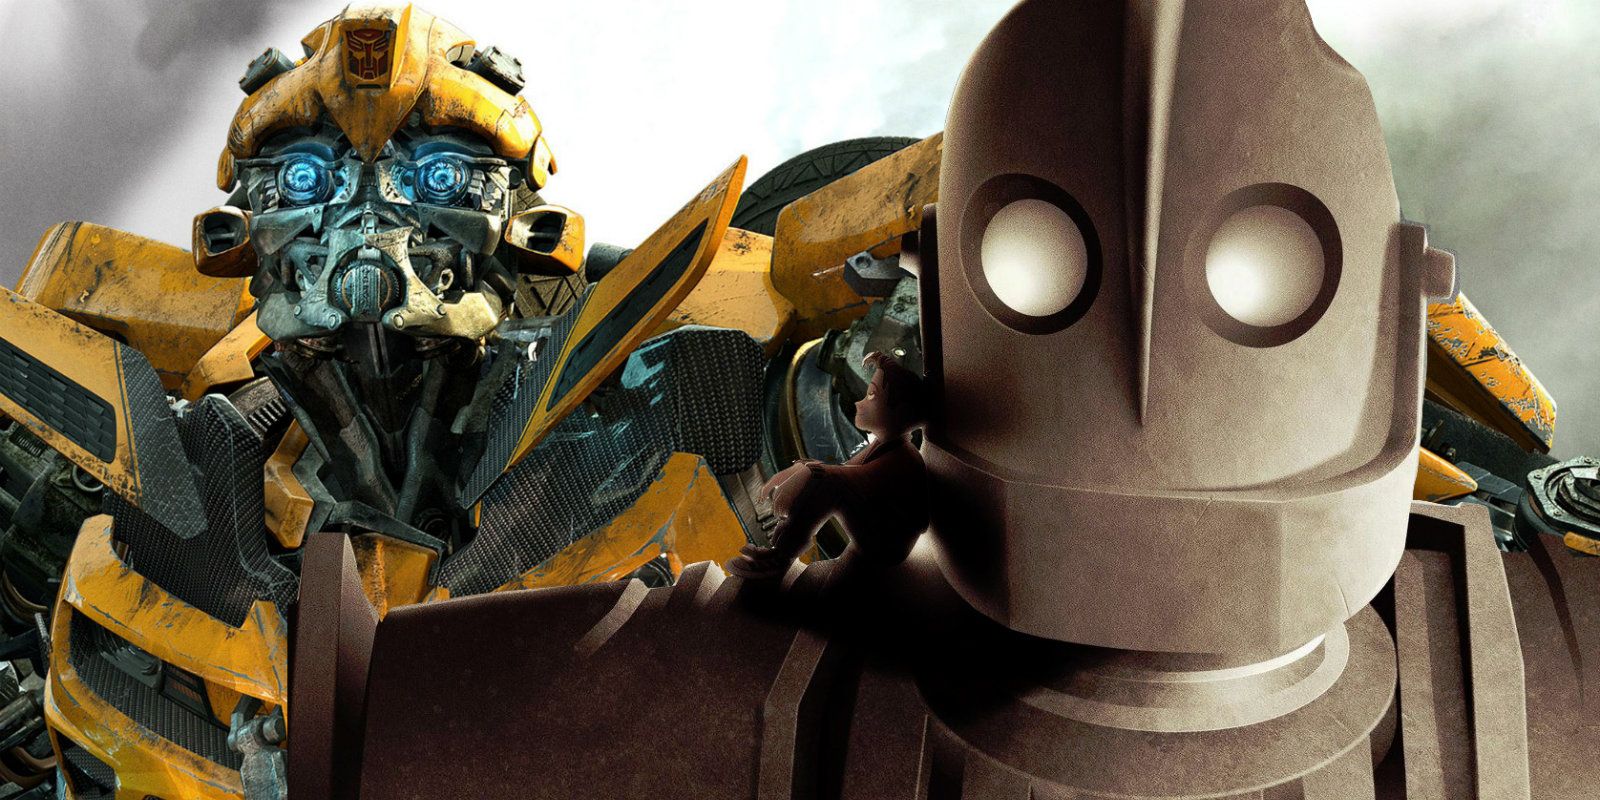 Bumblebee Movie Will Be Like Iron Giant; 1980s Setting Confirmed